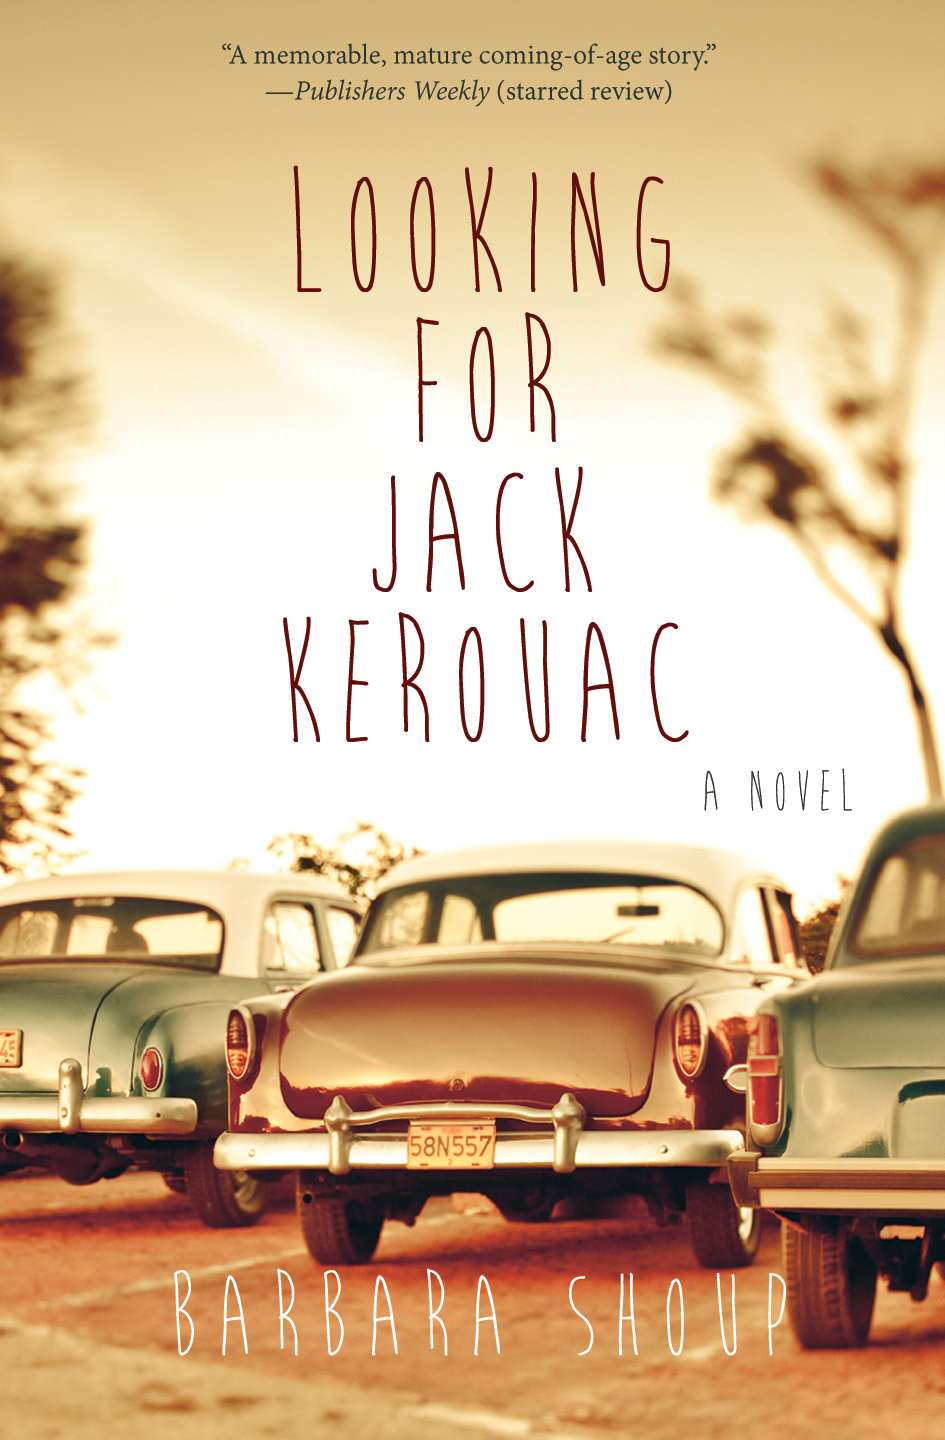 Looking for Jack Kerouac by Barbara Shoup